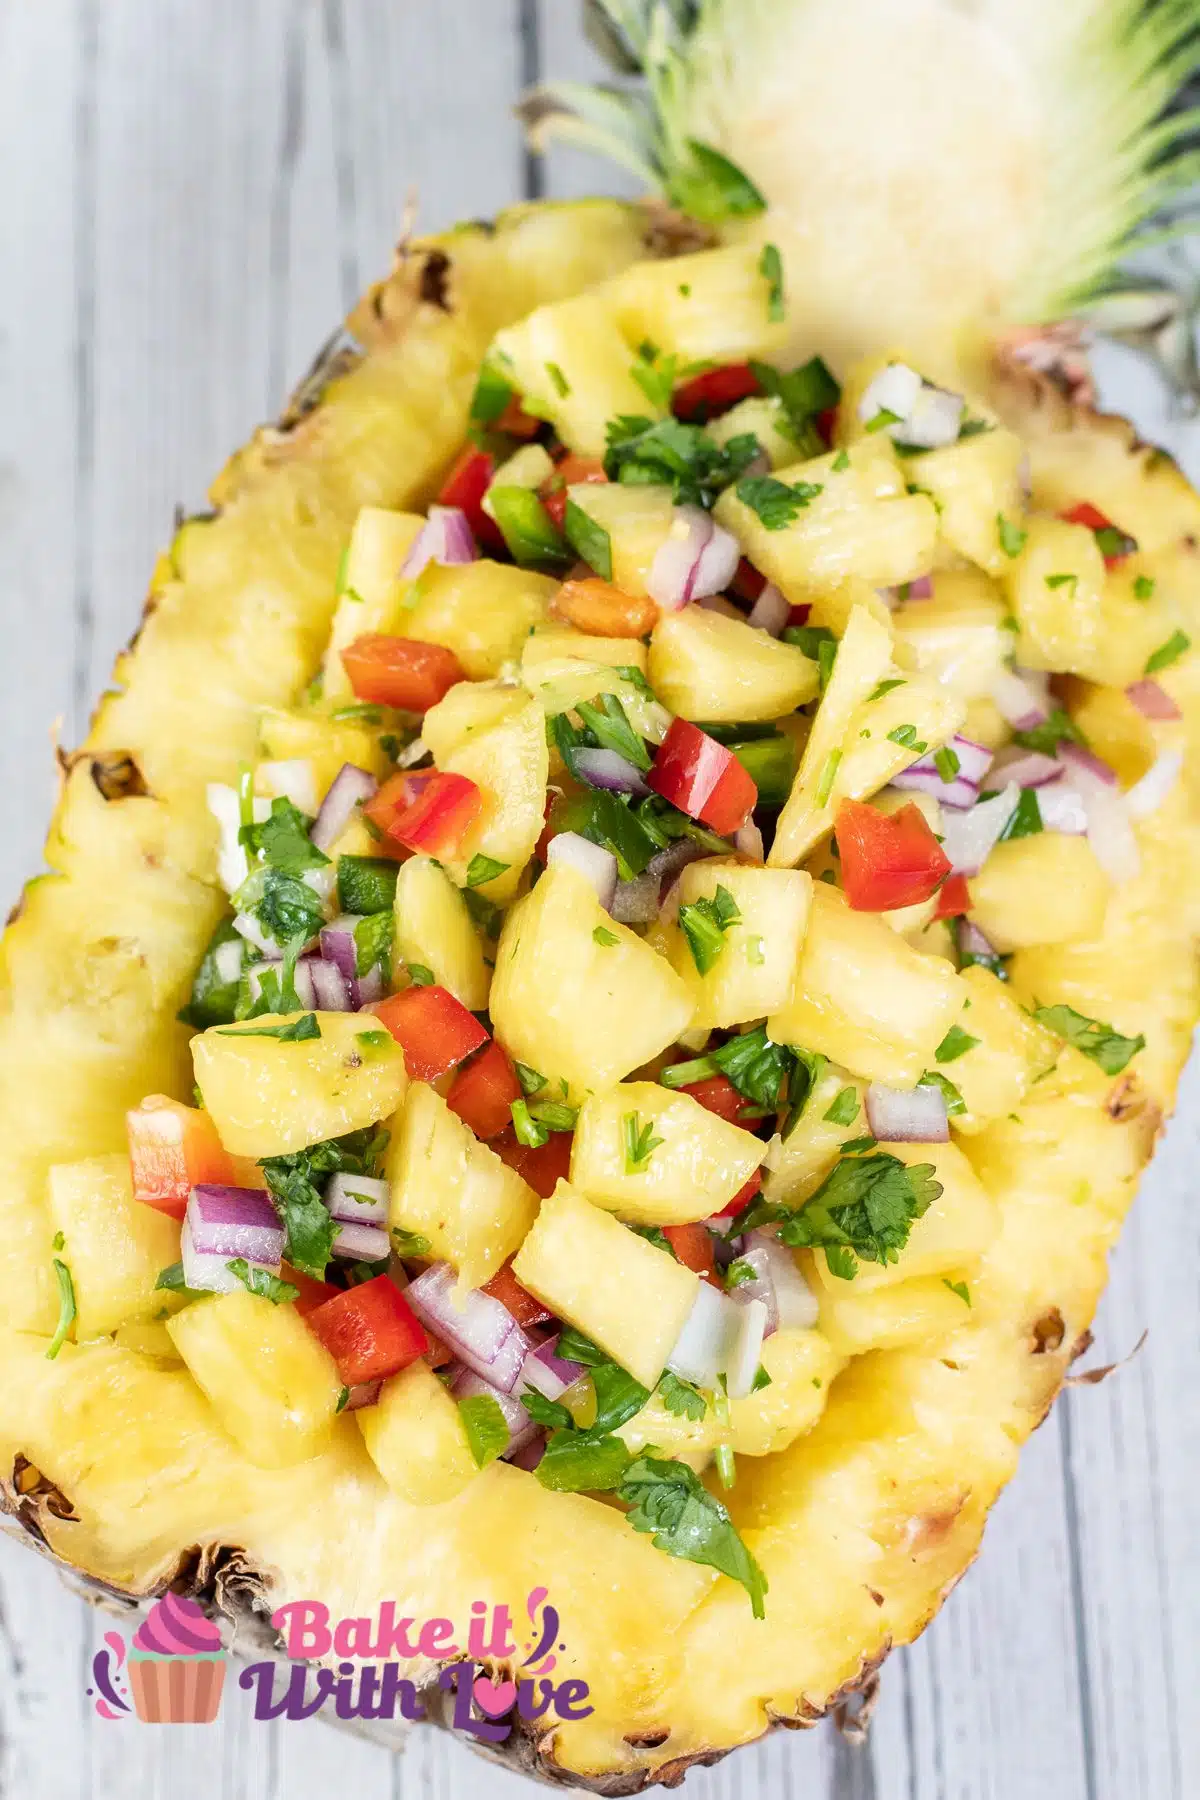 Tall image showing a cut in half pineapple filled with pineapple salsa.